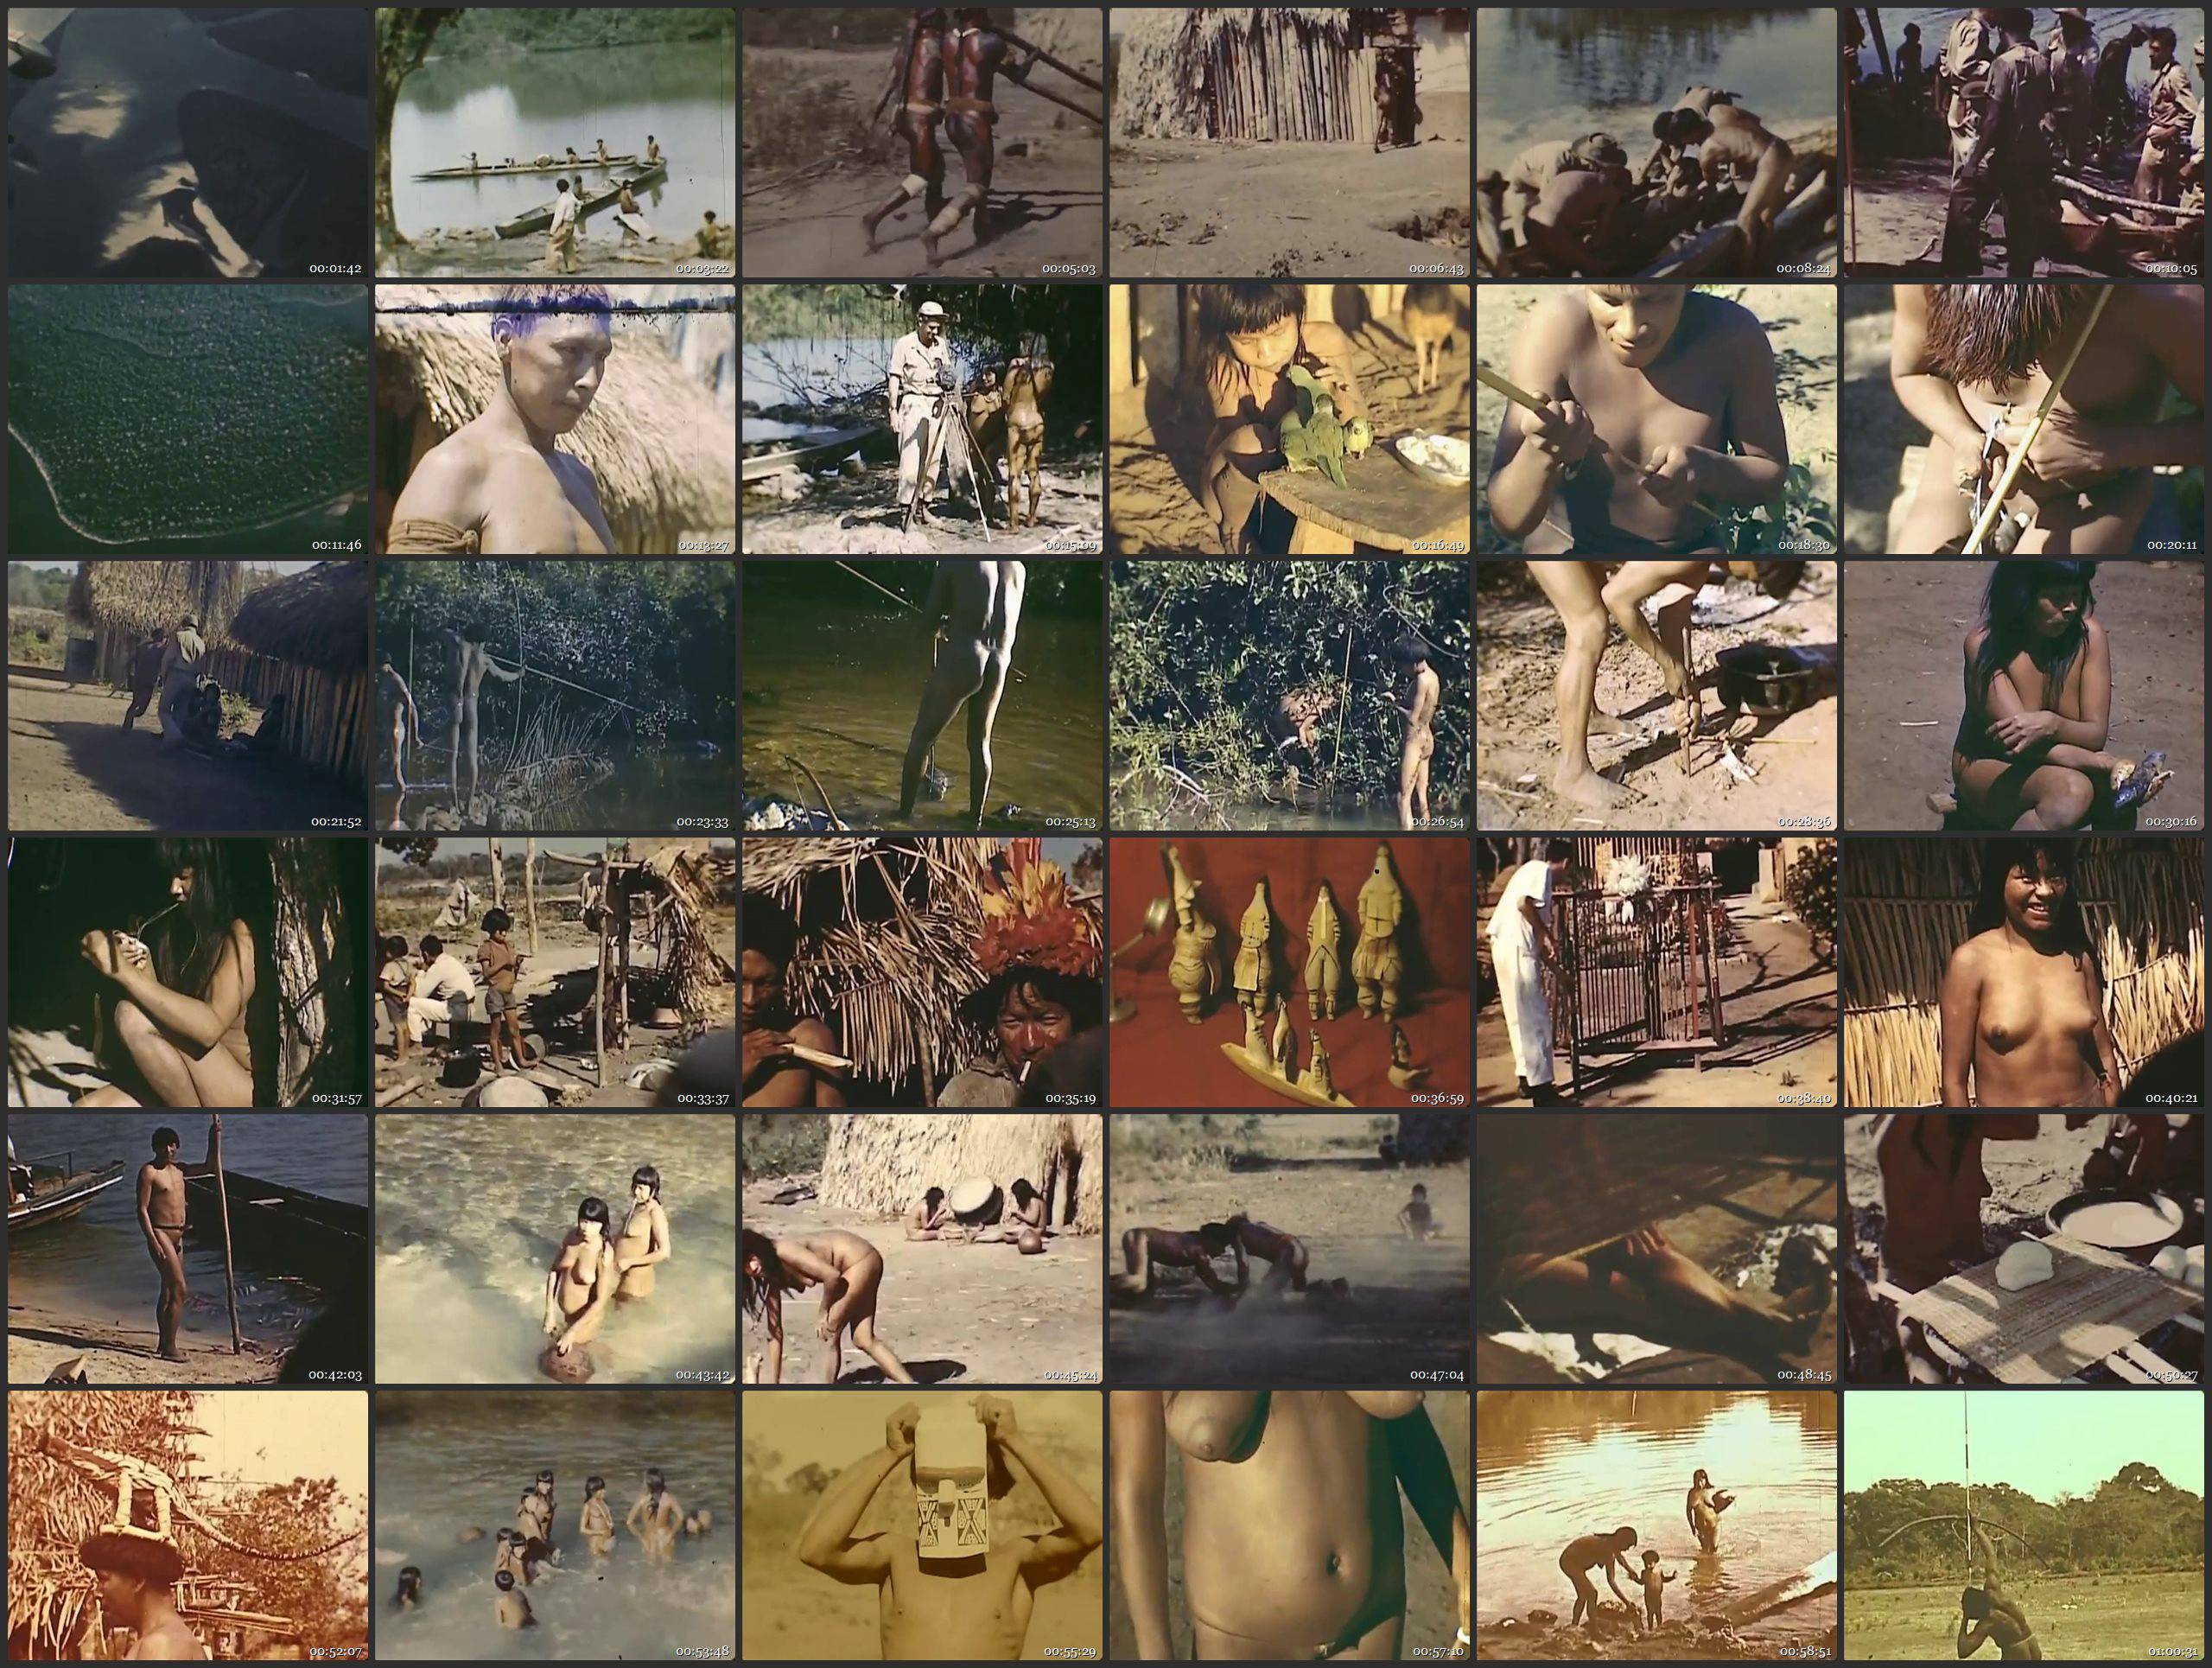 Other Nudist Videos Xingu Indians - Expedition to rainforests of Brazil in 1948 - Thumbnails